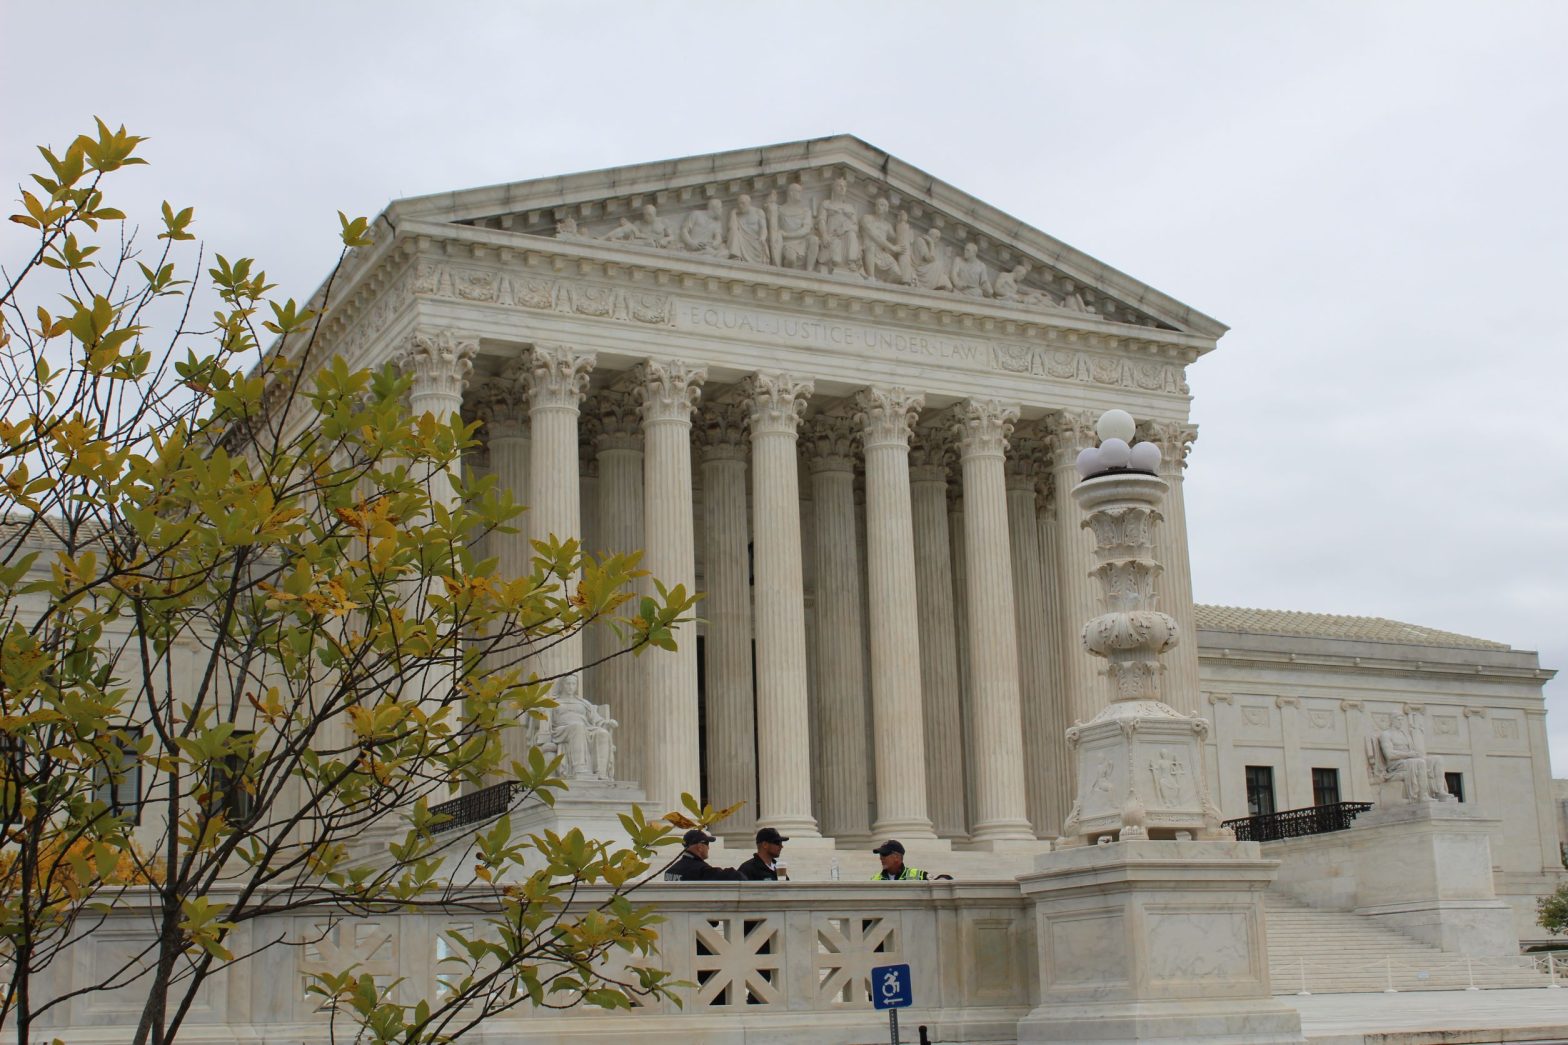 Abortion-Rights Protesters Arrested After Disrupting Supreme Court Hearing